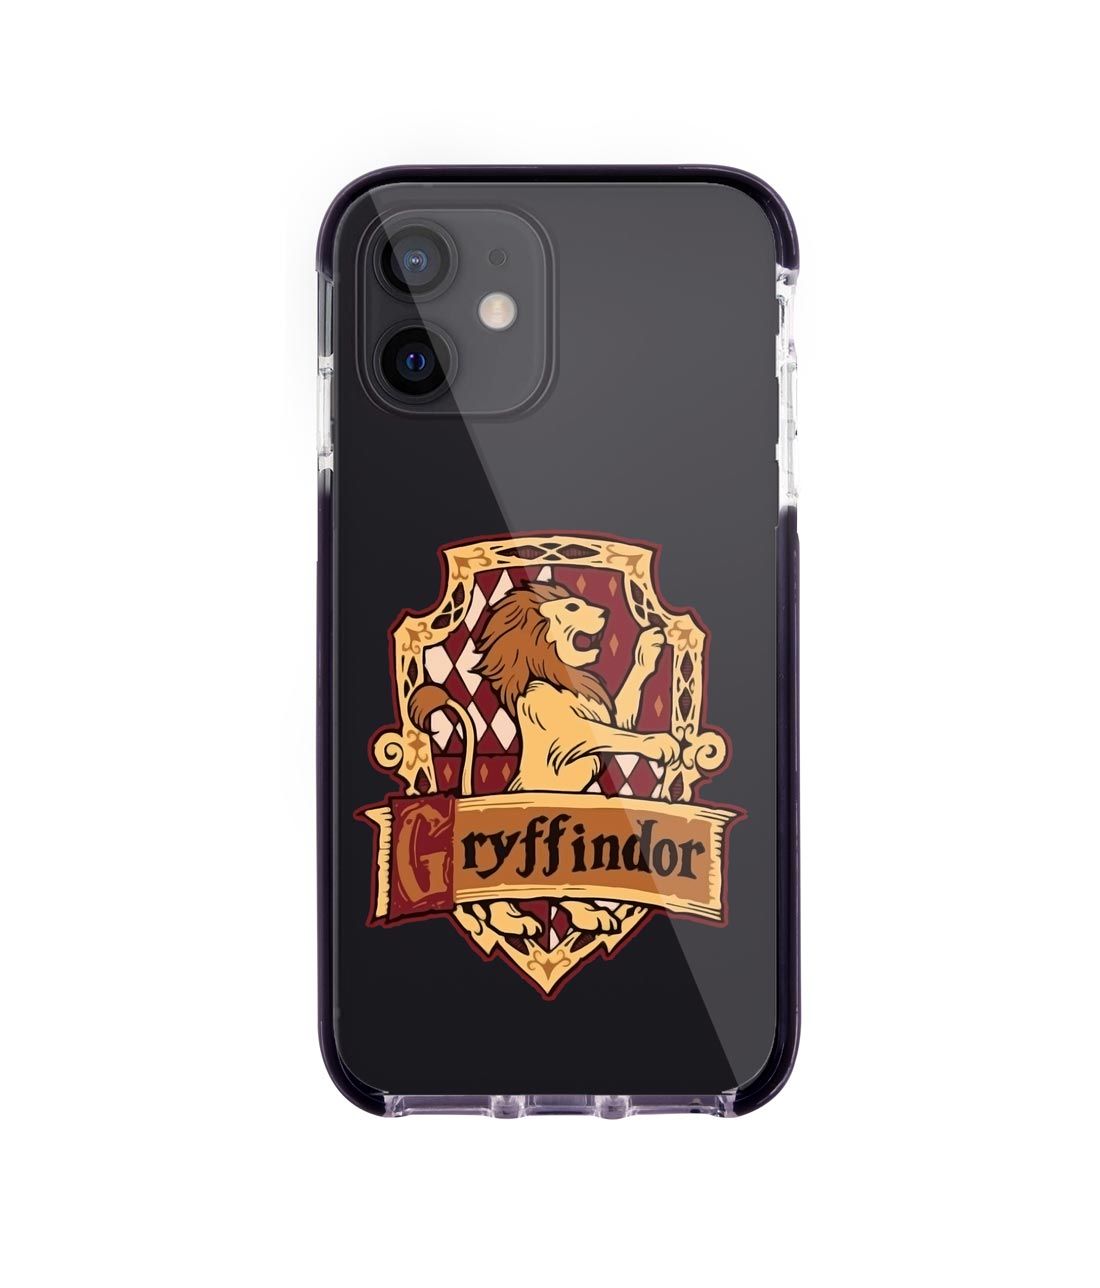 Crest Gryffindor - Extreme Case for iPhone 12 Mini